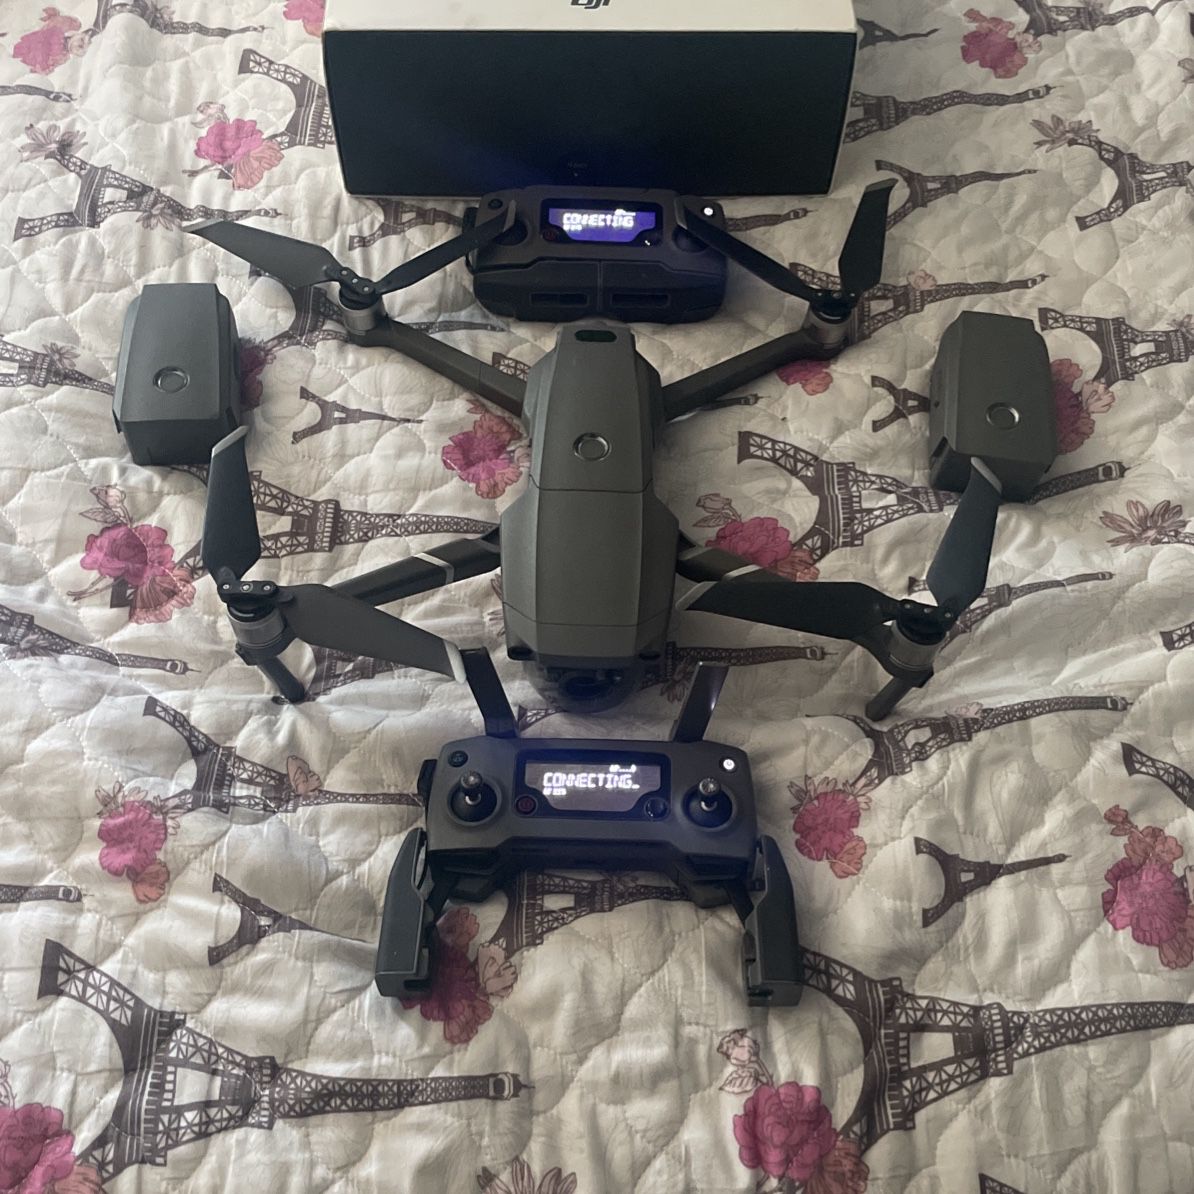 Mavic 2 Zoom  w/ 2 Controllers, 3 Batteries and A Go Pro Hero 3plus Camera 